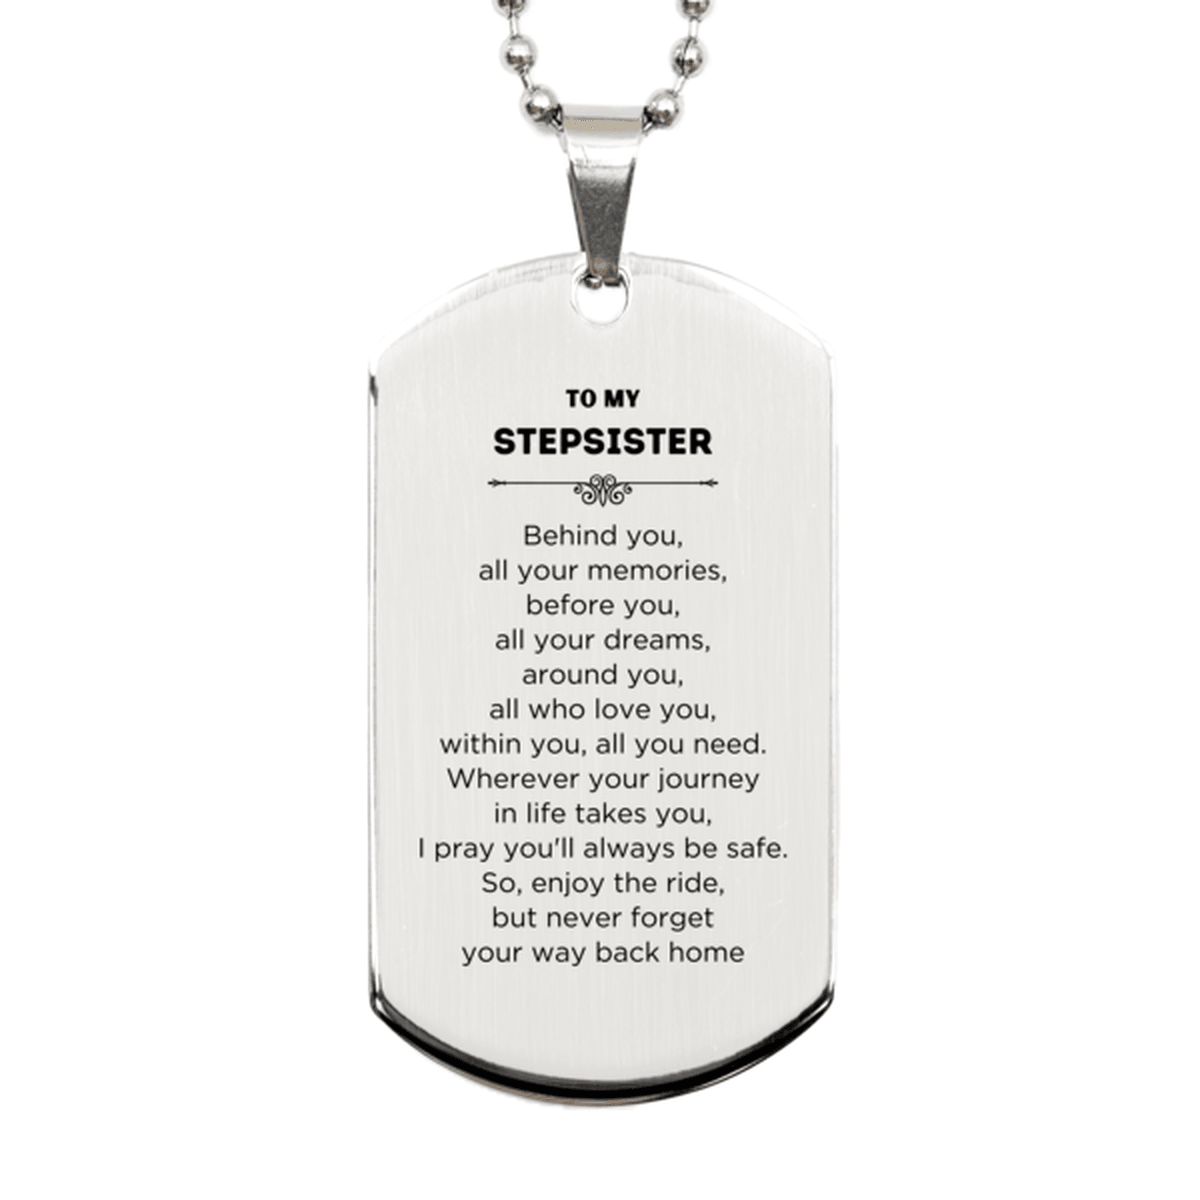 Stepsister Silver Dog Tag Necklace Birthday Christmas Unique Gifts Behind you, all your memories, before you, all your dreams - Mallard Moon Gift Shop